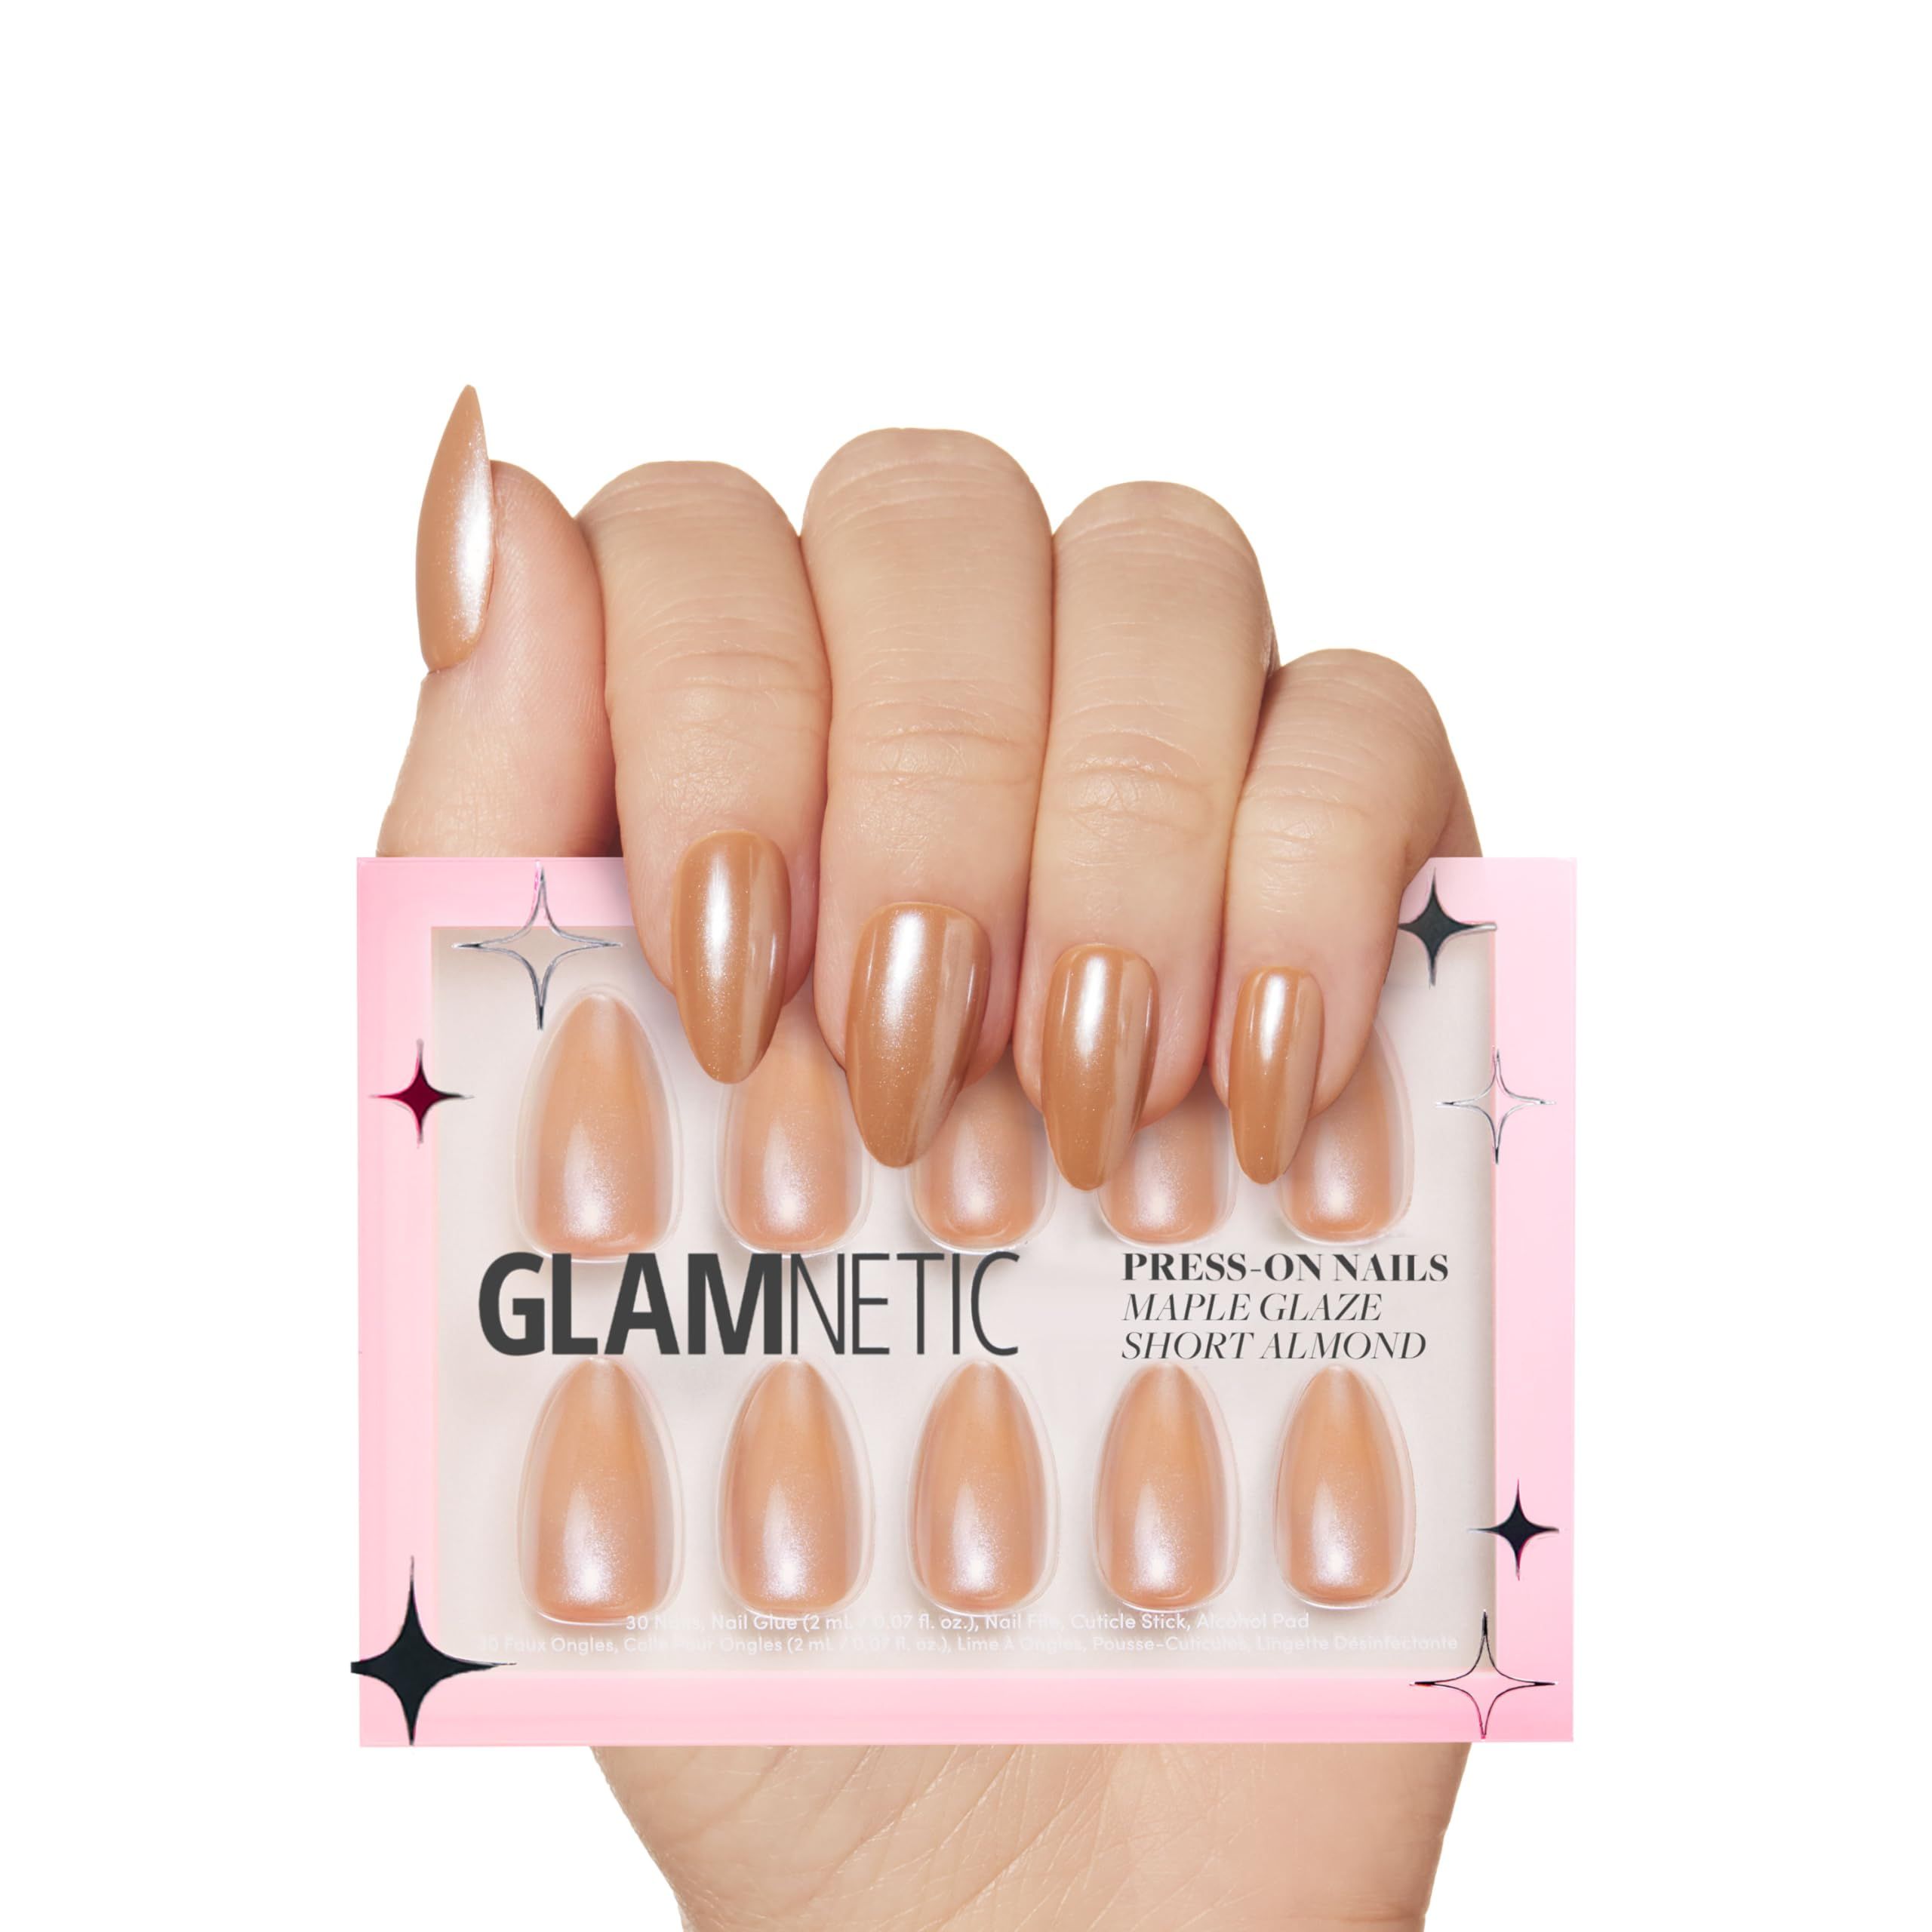 Glamnetic Press On Nails - Maple Glaze | Short Almond Nude Brown Neutral Nails with Glaze Finish ... | Amazon (US)